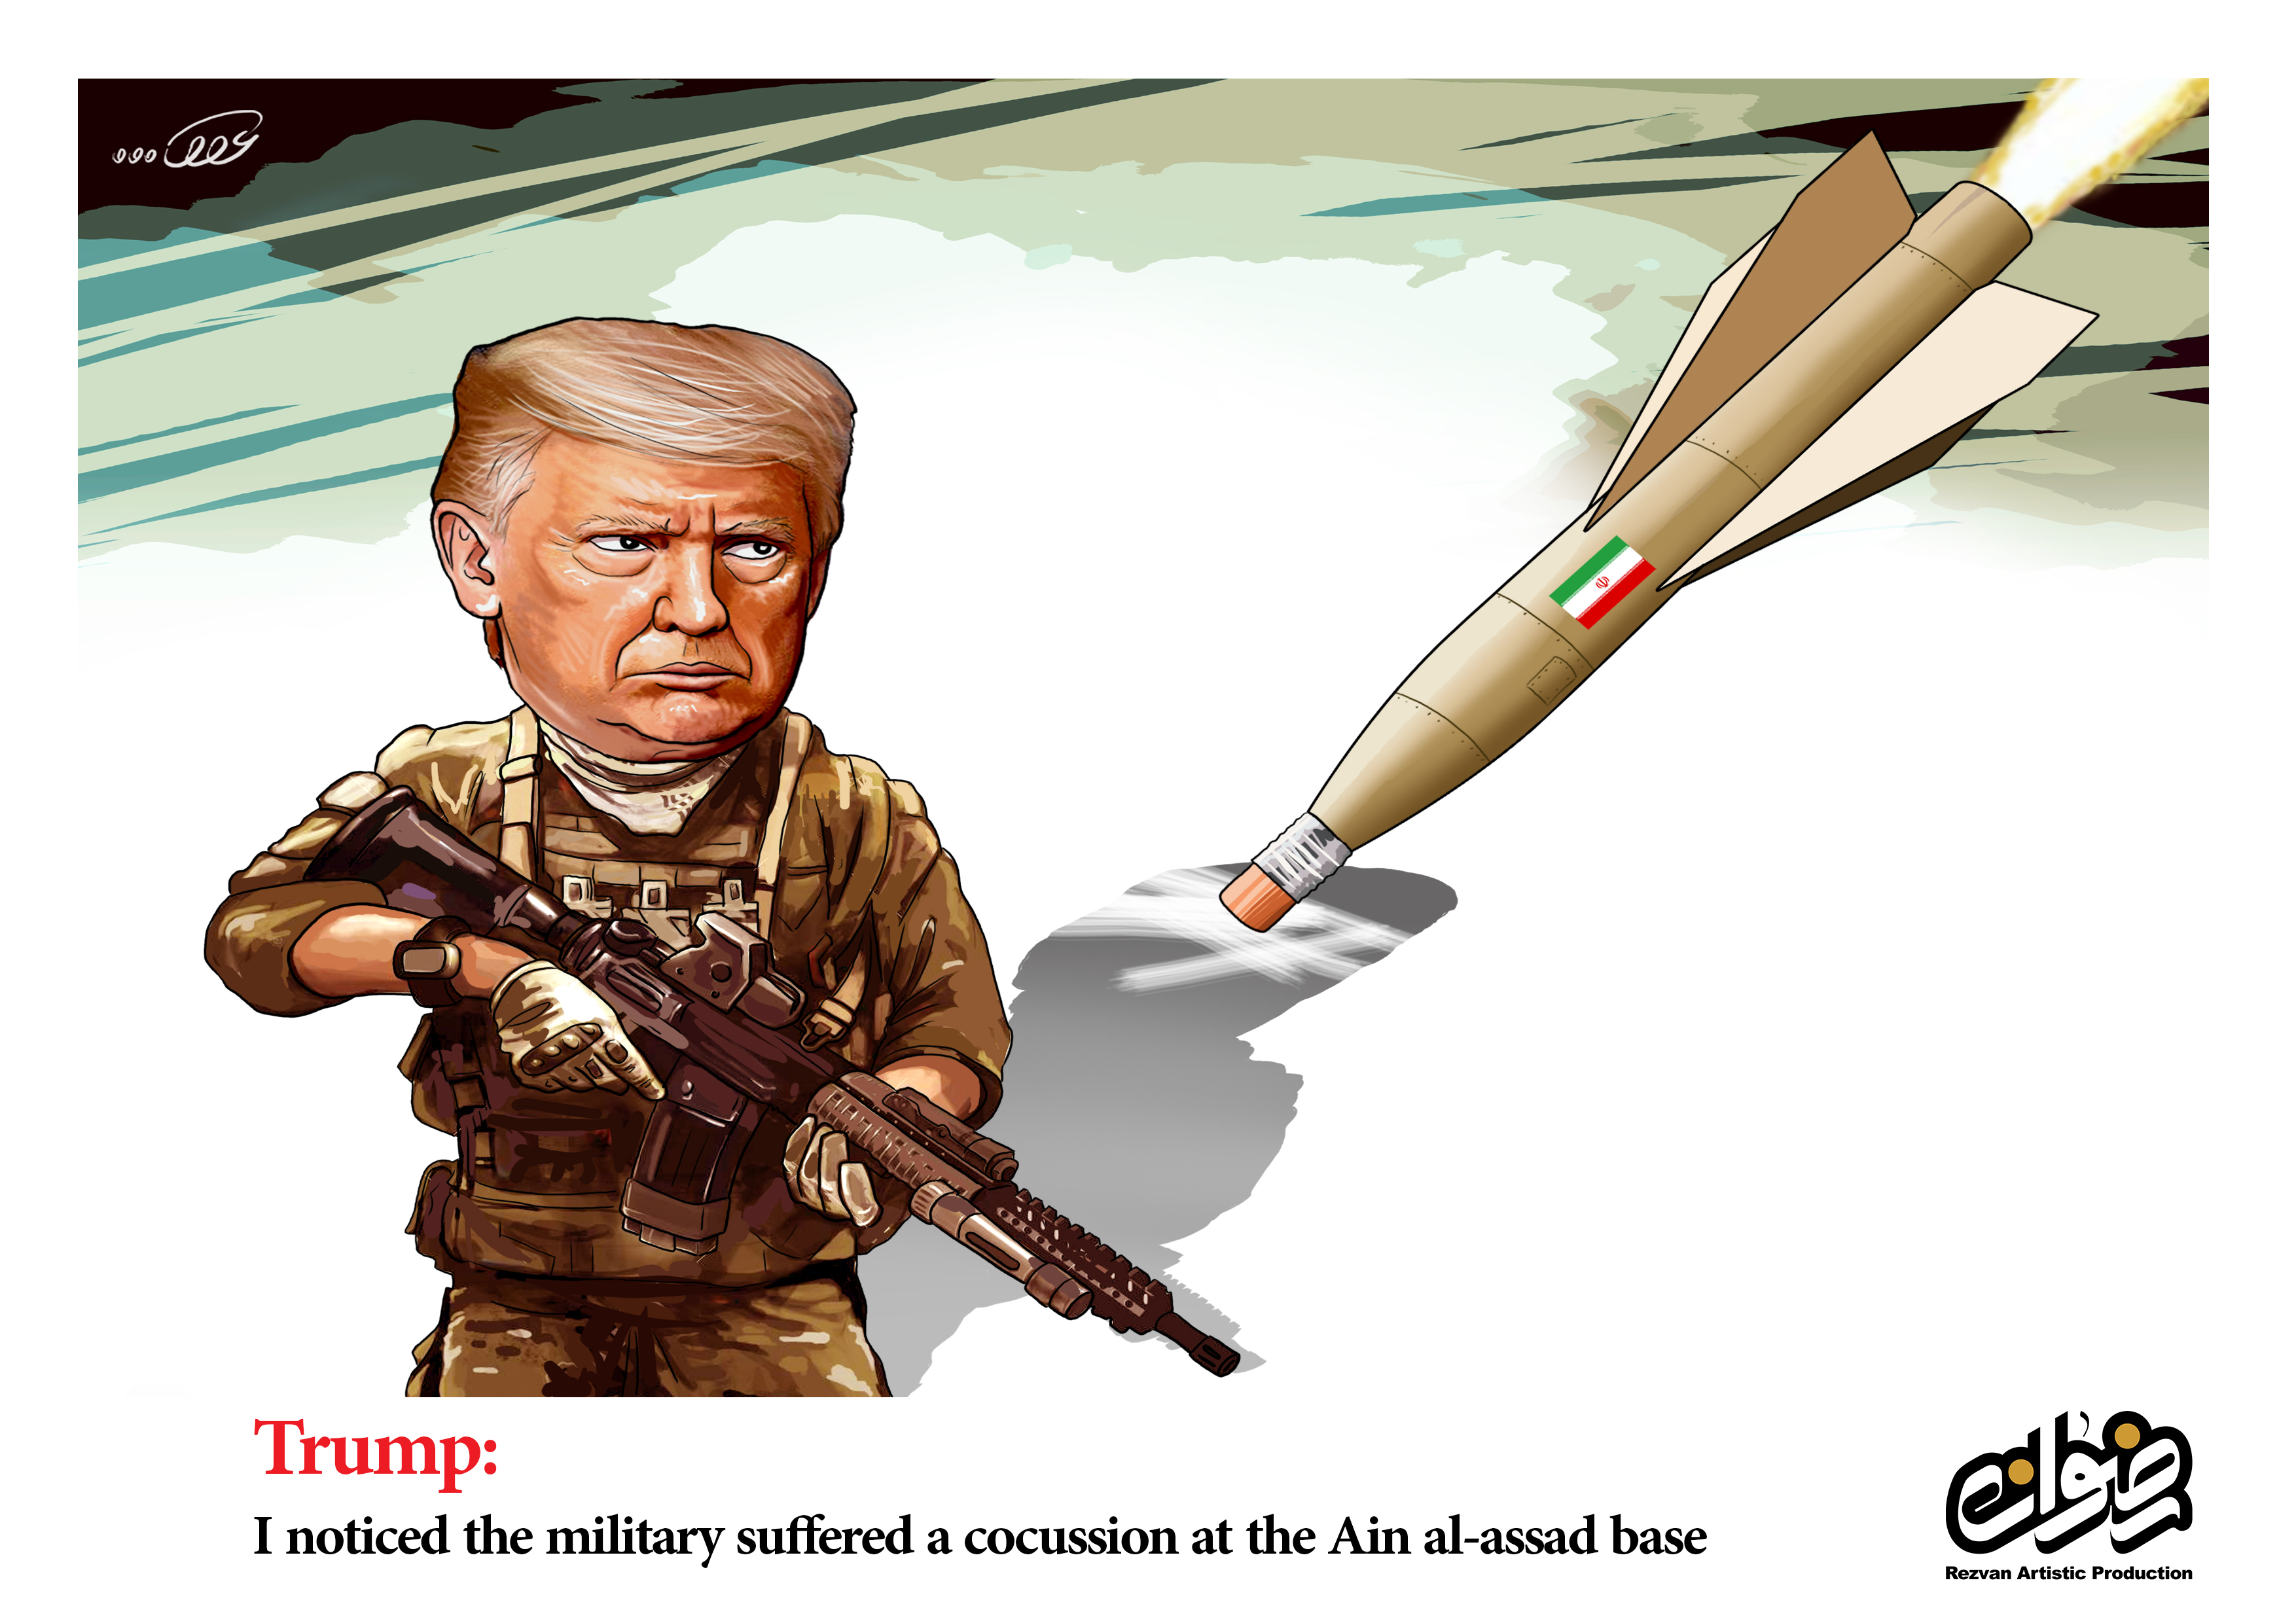 Trump: I noticed the military suffered a cocussion at the Ain al-assad base